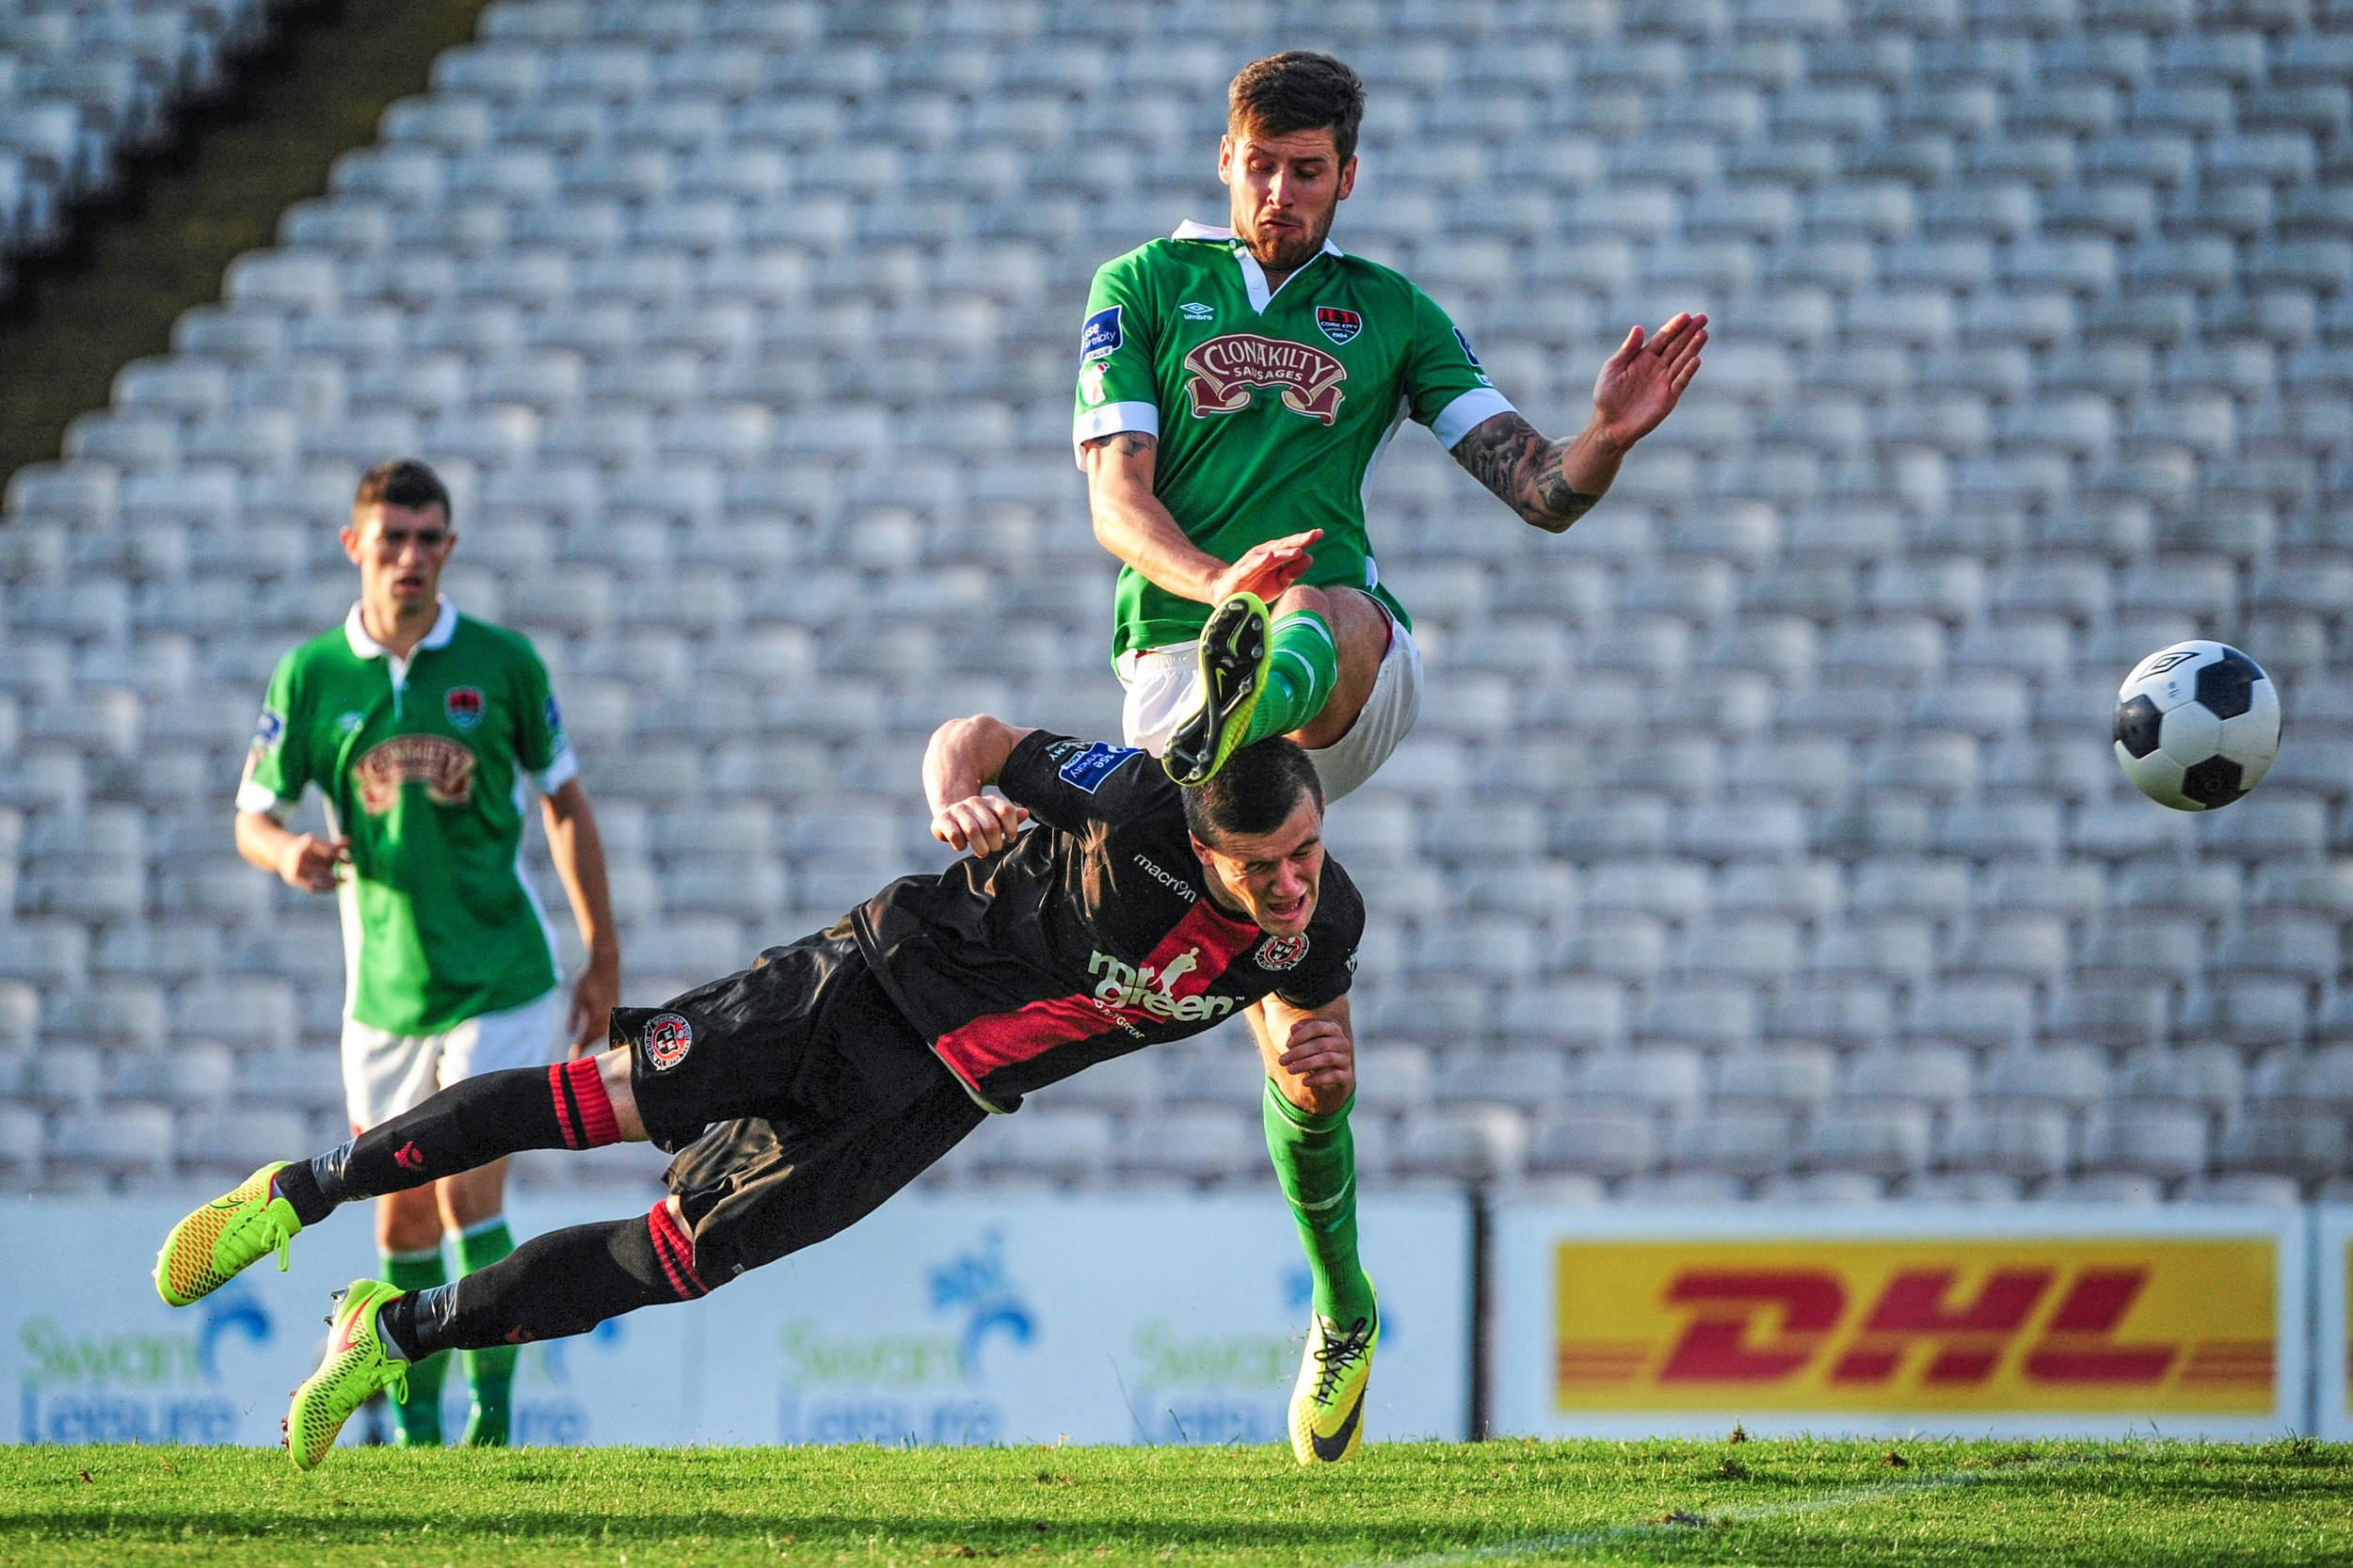  Steven Beattie of Bohemians scores his side's winning goal despite the tackle of Darren Dennehy of Cork City at Dalymount Park in Dublin 2014. Beattie would leave the game with a concussion after the play.&nbsp;/&nbsp; Sportsfile  